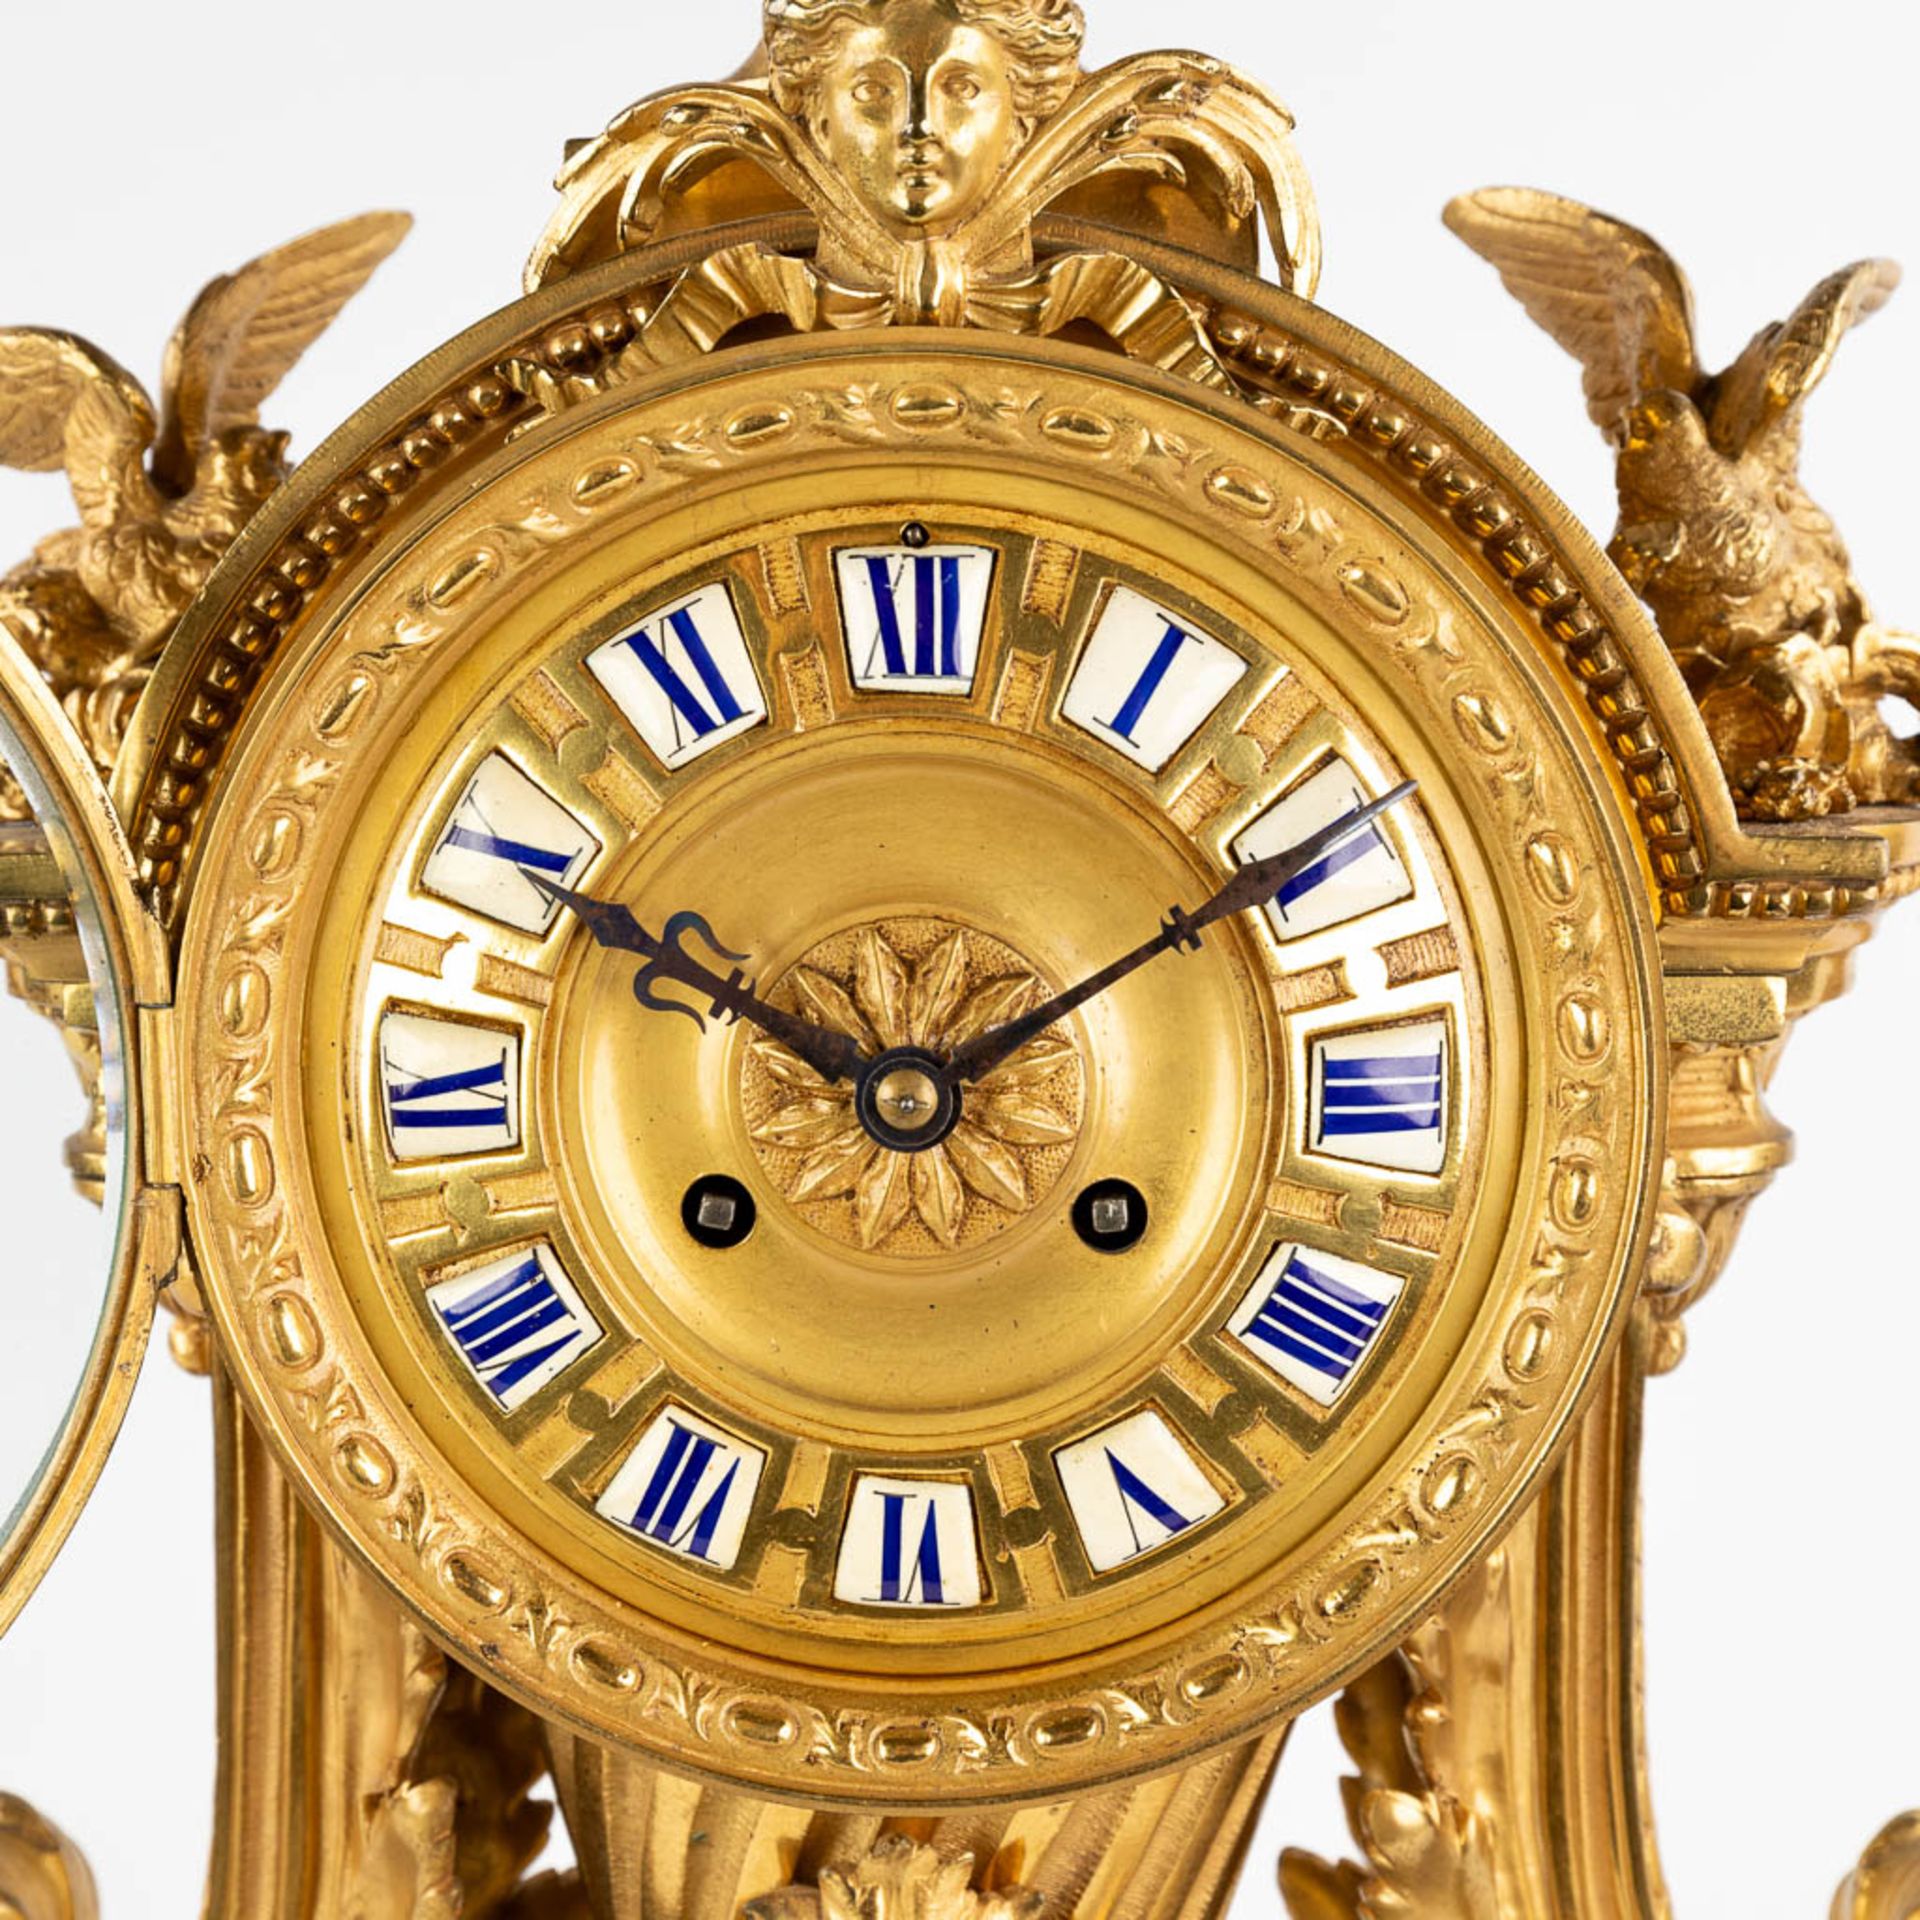 A three-piece mantle garniture clock and candelabra, gilt bronze in a Louis XVI style, 19th C. (D:19 - Image 17 of 19